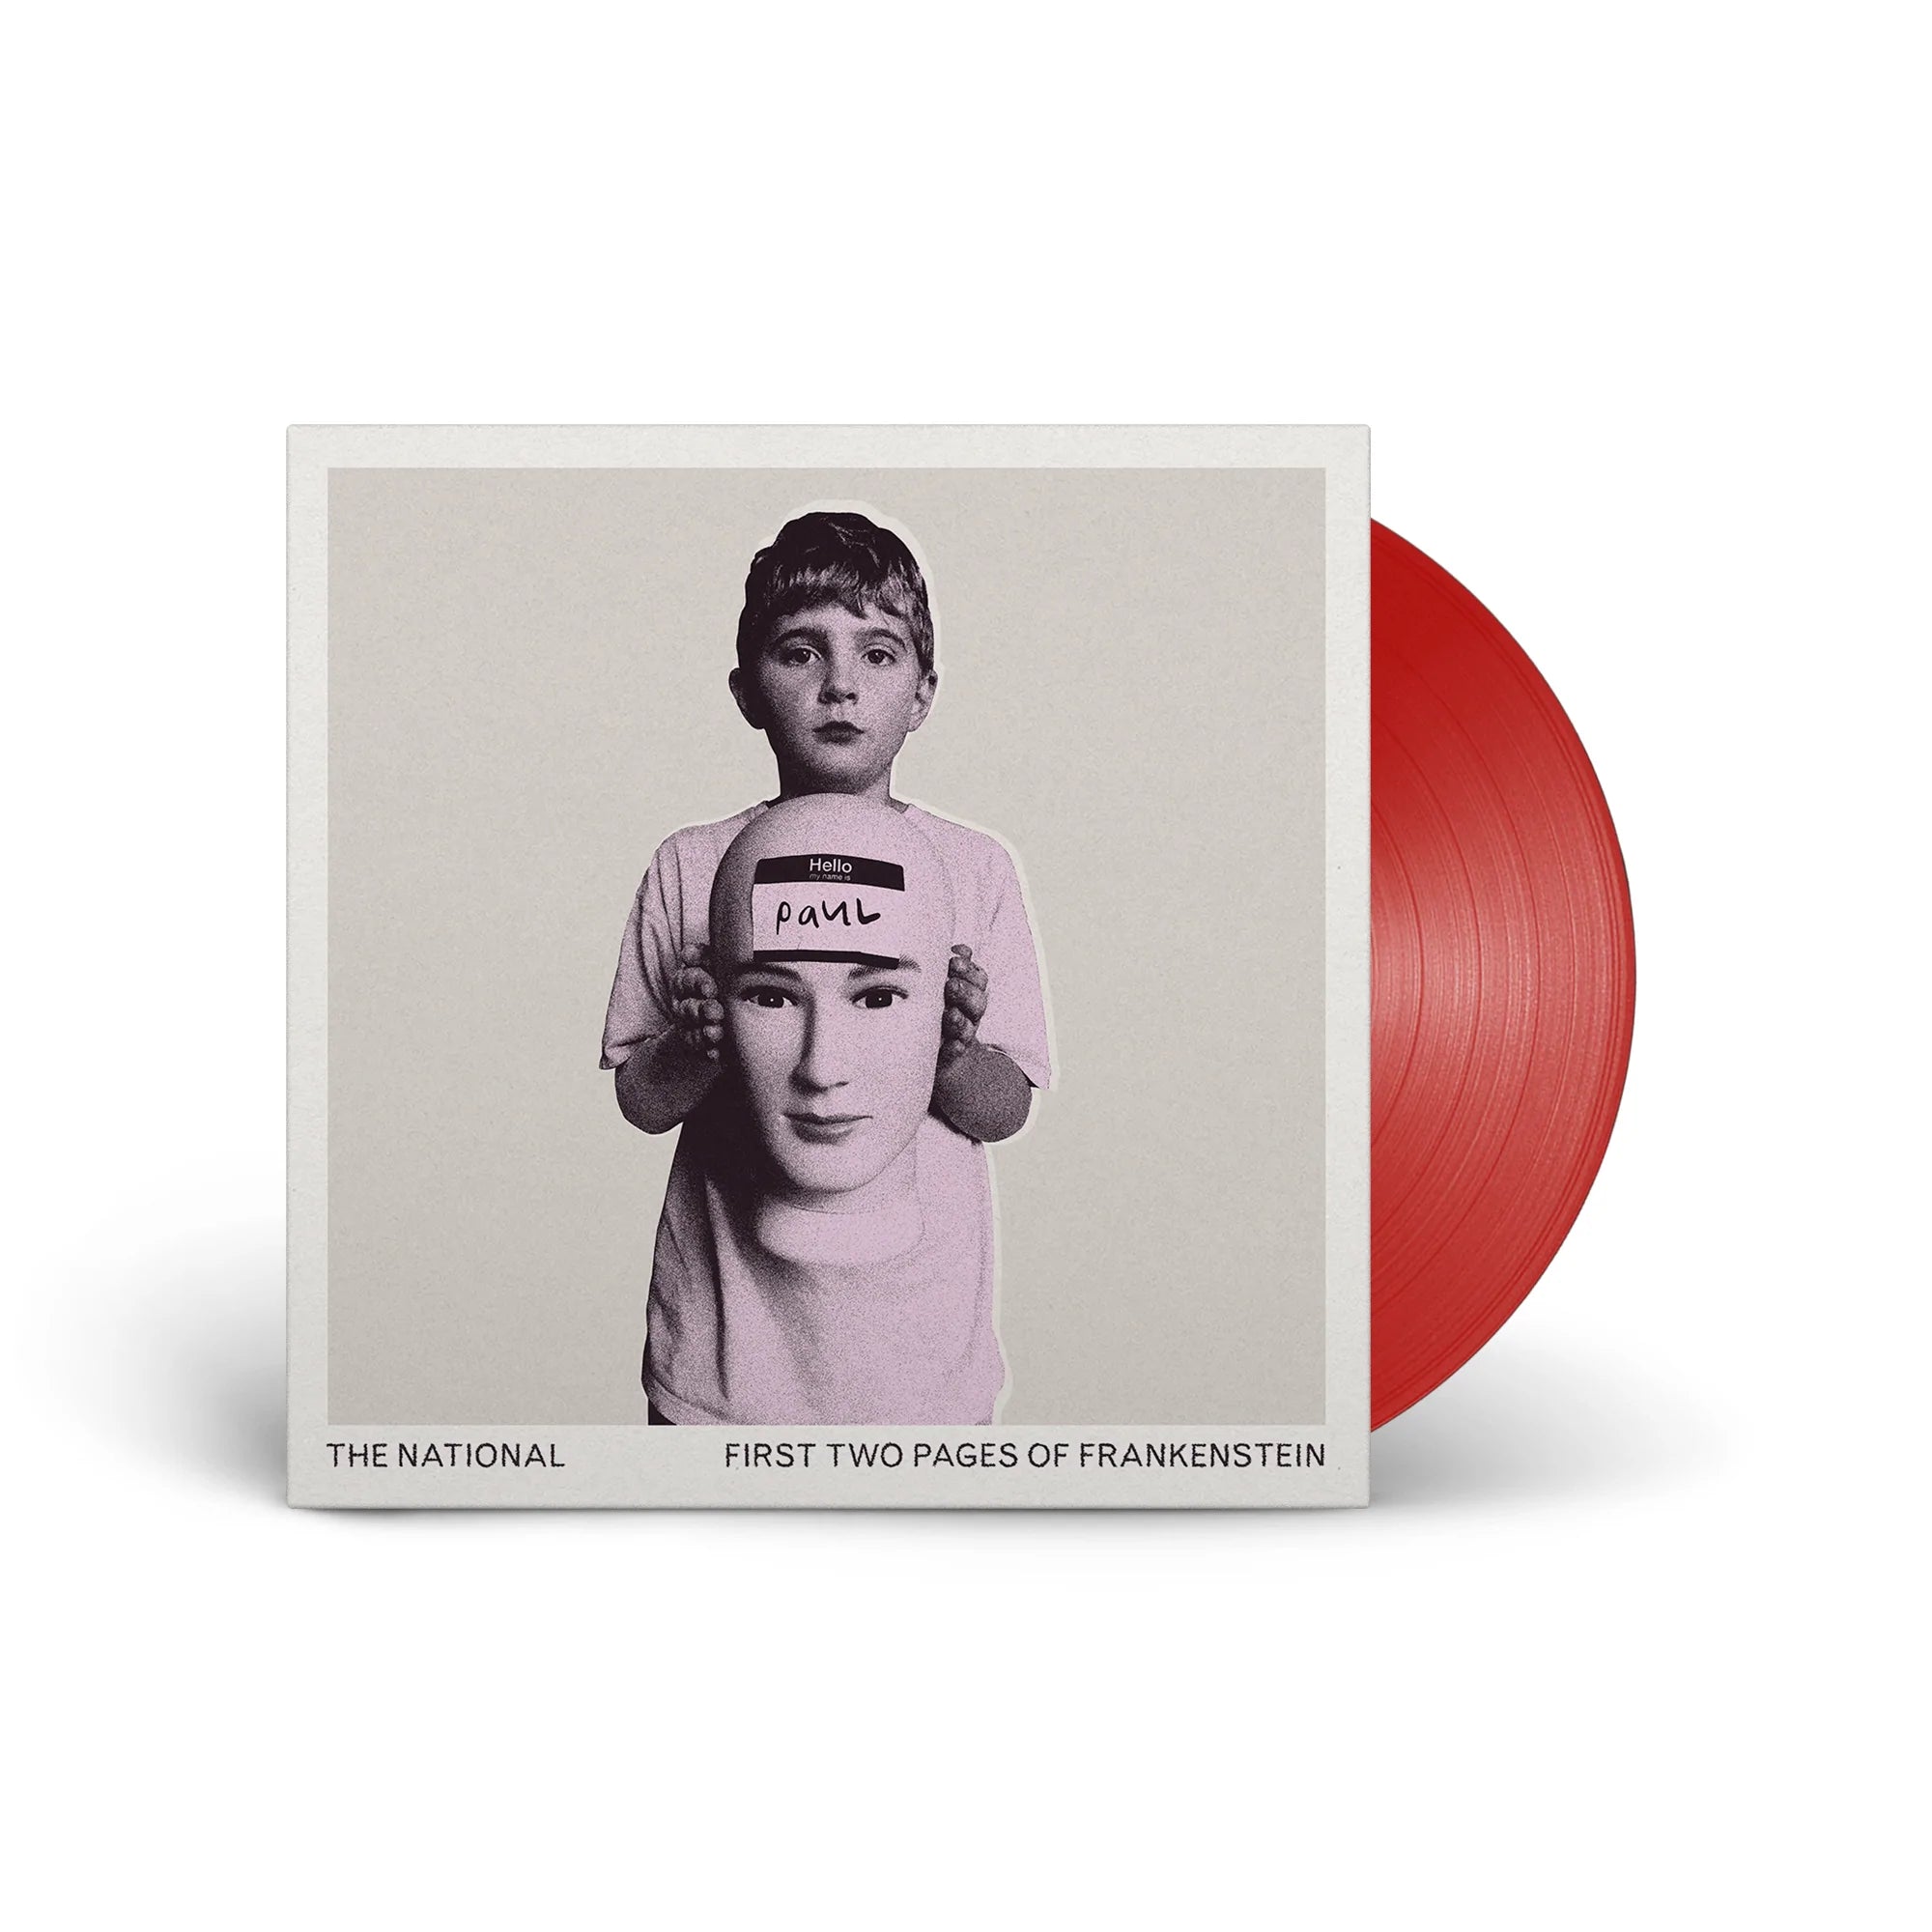 Buy The National - First Two Pages Of Frankenstein (Indie Exclusive Gatefold Red Vinyl)